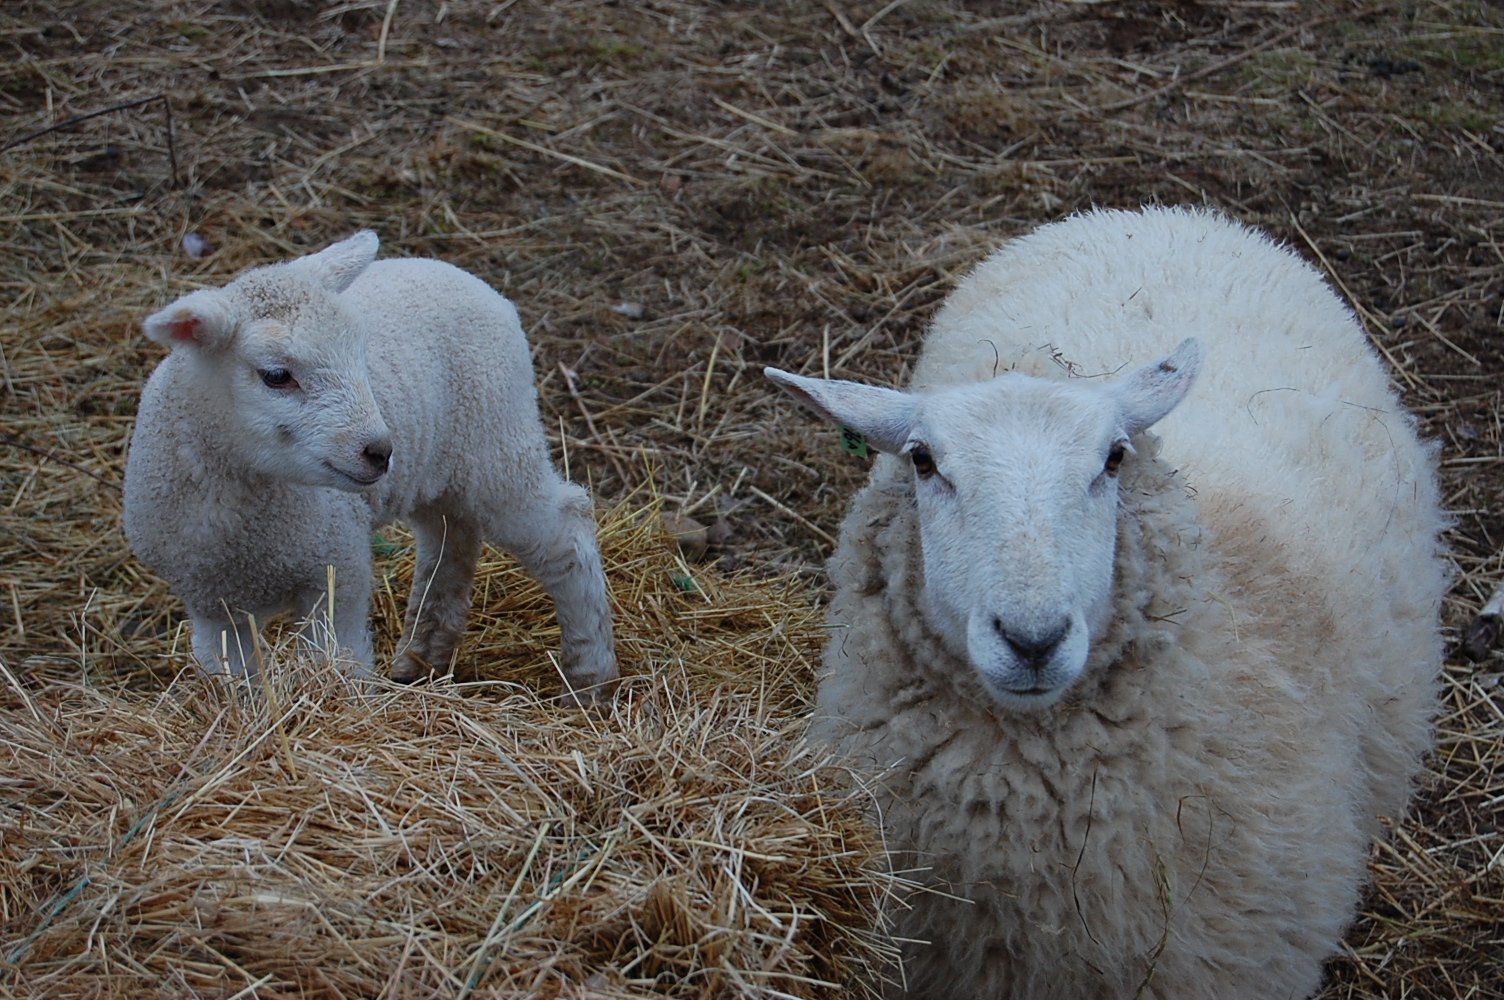 Lambing is always a special time at Little Foot Yurts!